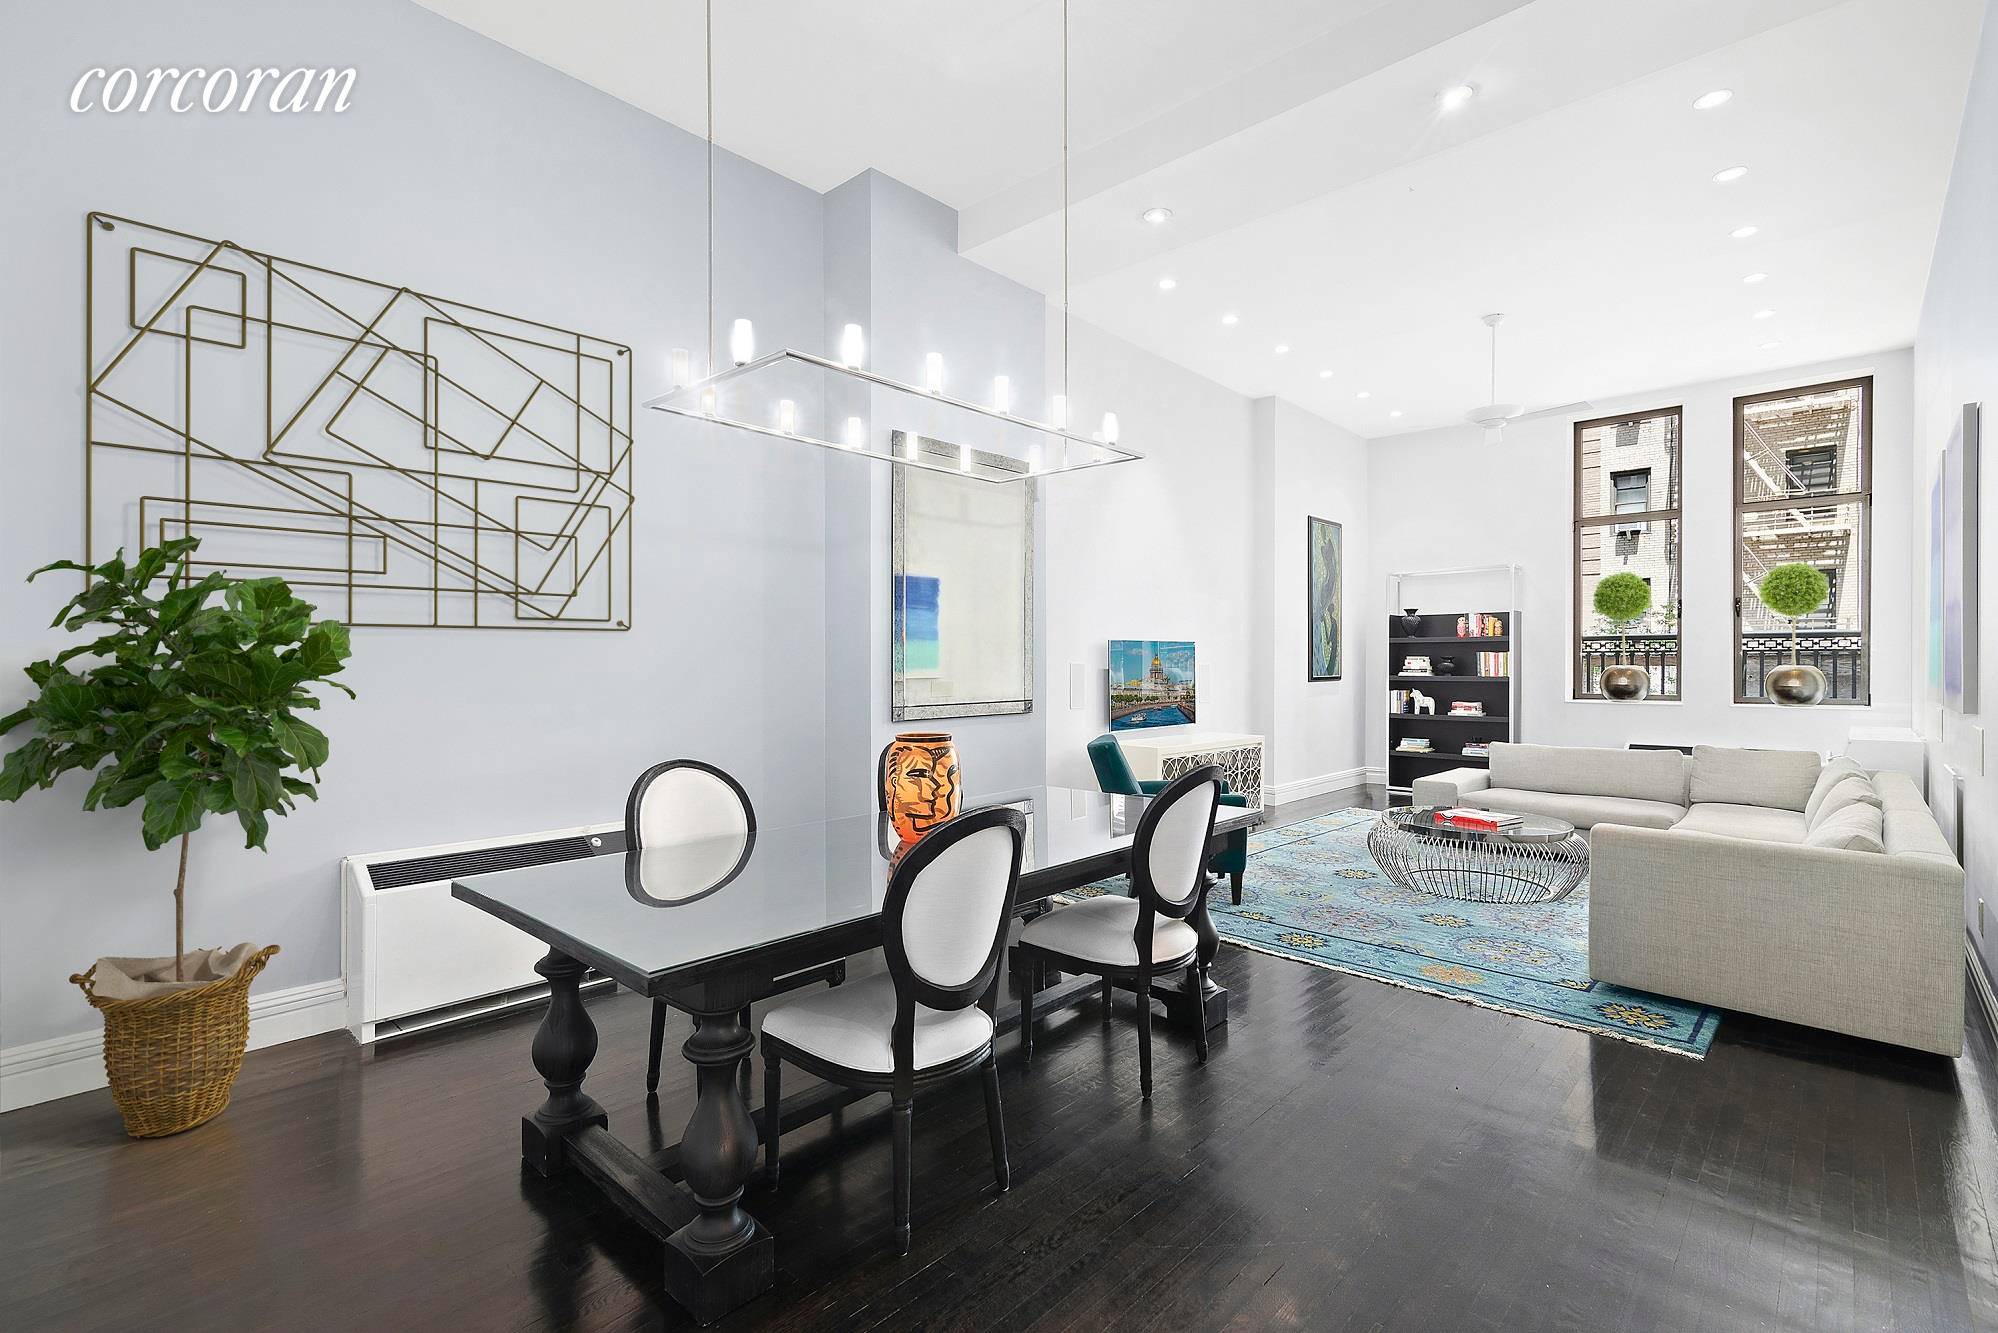 252 Seventh Avenue, the Chelsea Mercantile, apartment 3 D is a true 3 bedroom loft with 2.